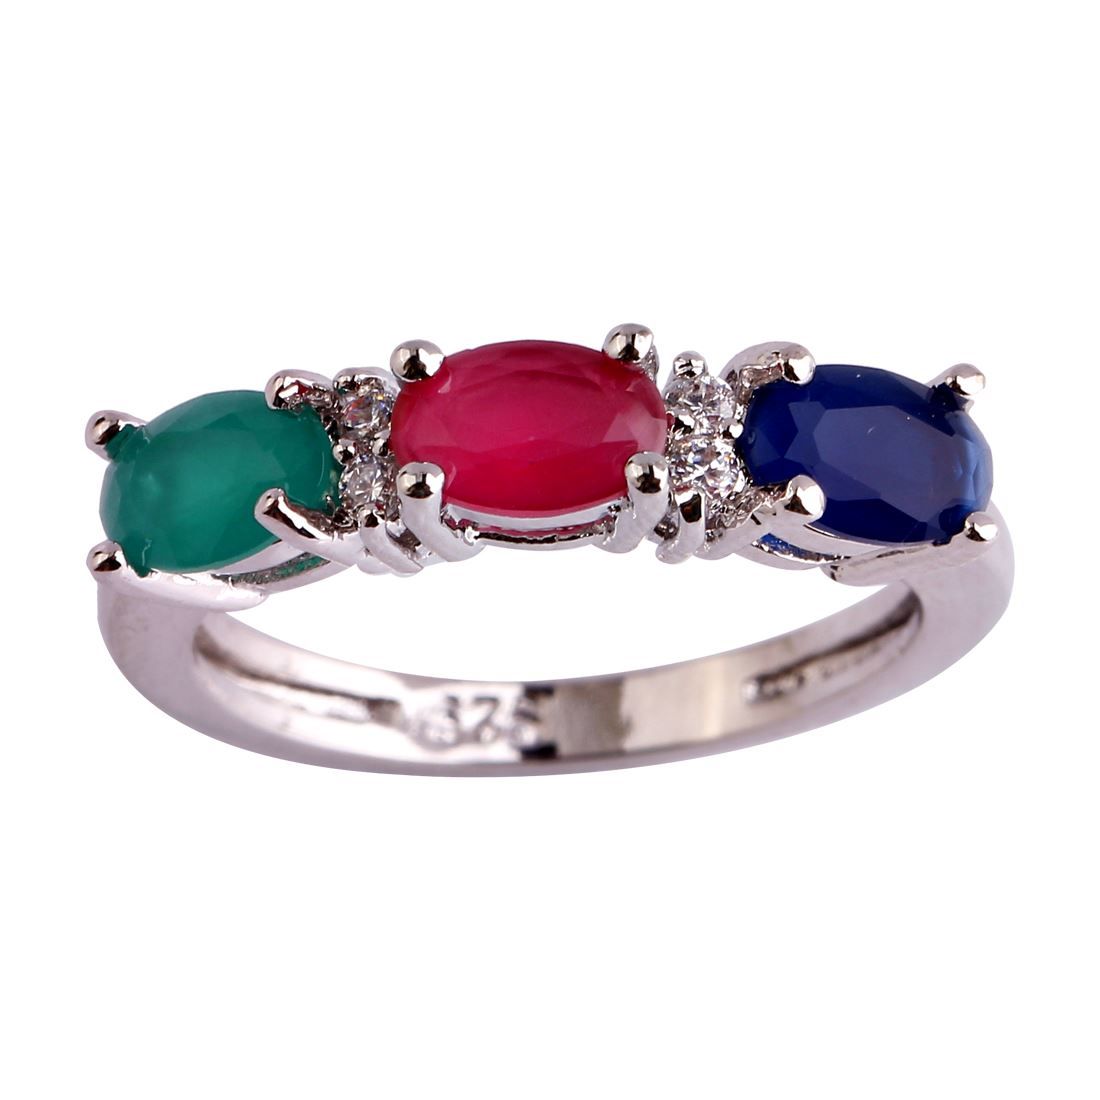 Sterling Silver Jewelry Ring Multi Gemstone Women Jewelry Ring Emerald /& Ruby Sterling Silver Ring for Women Christmas Gift Women Gift